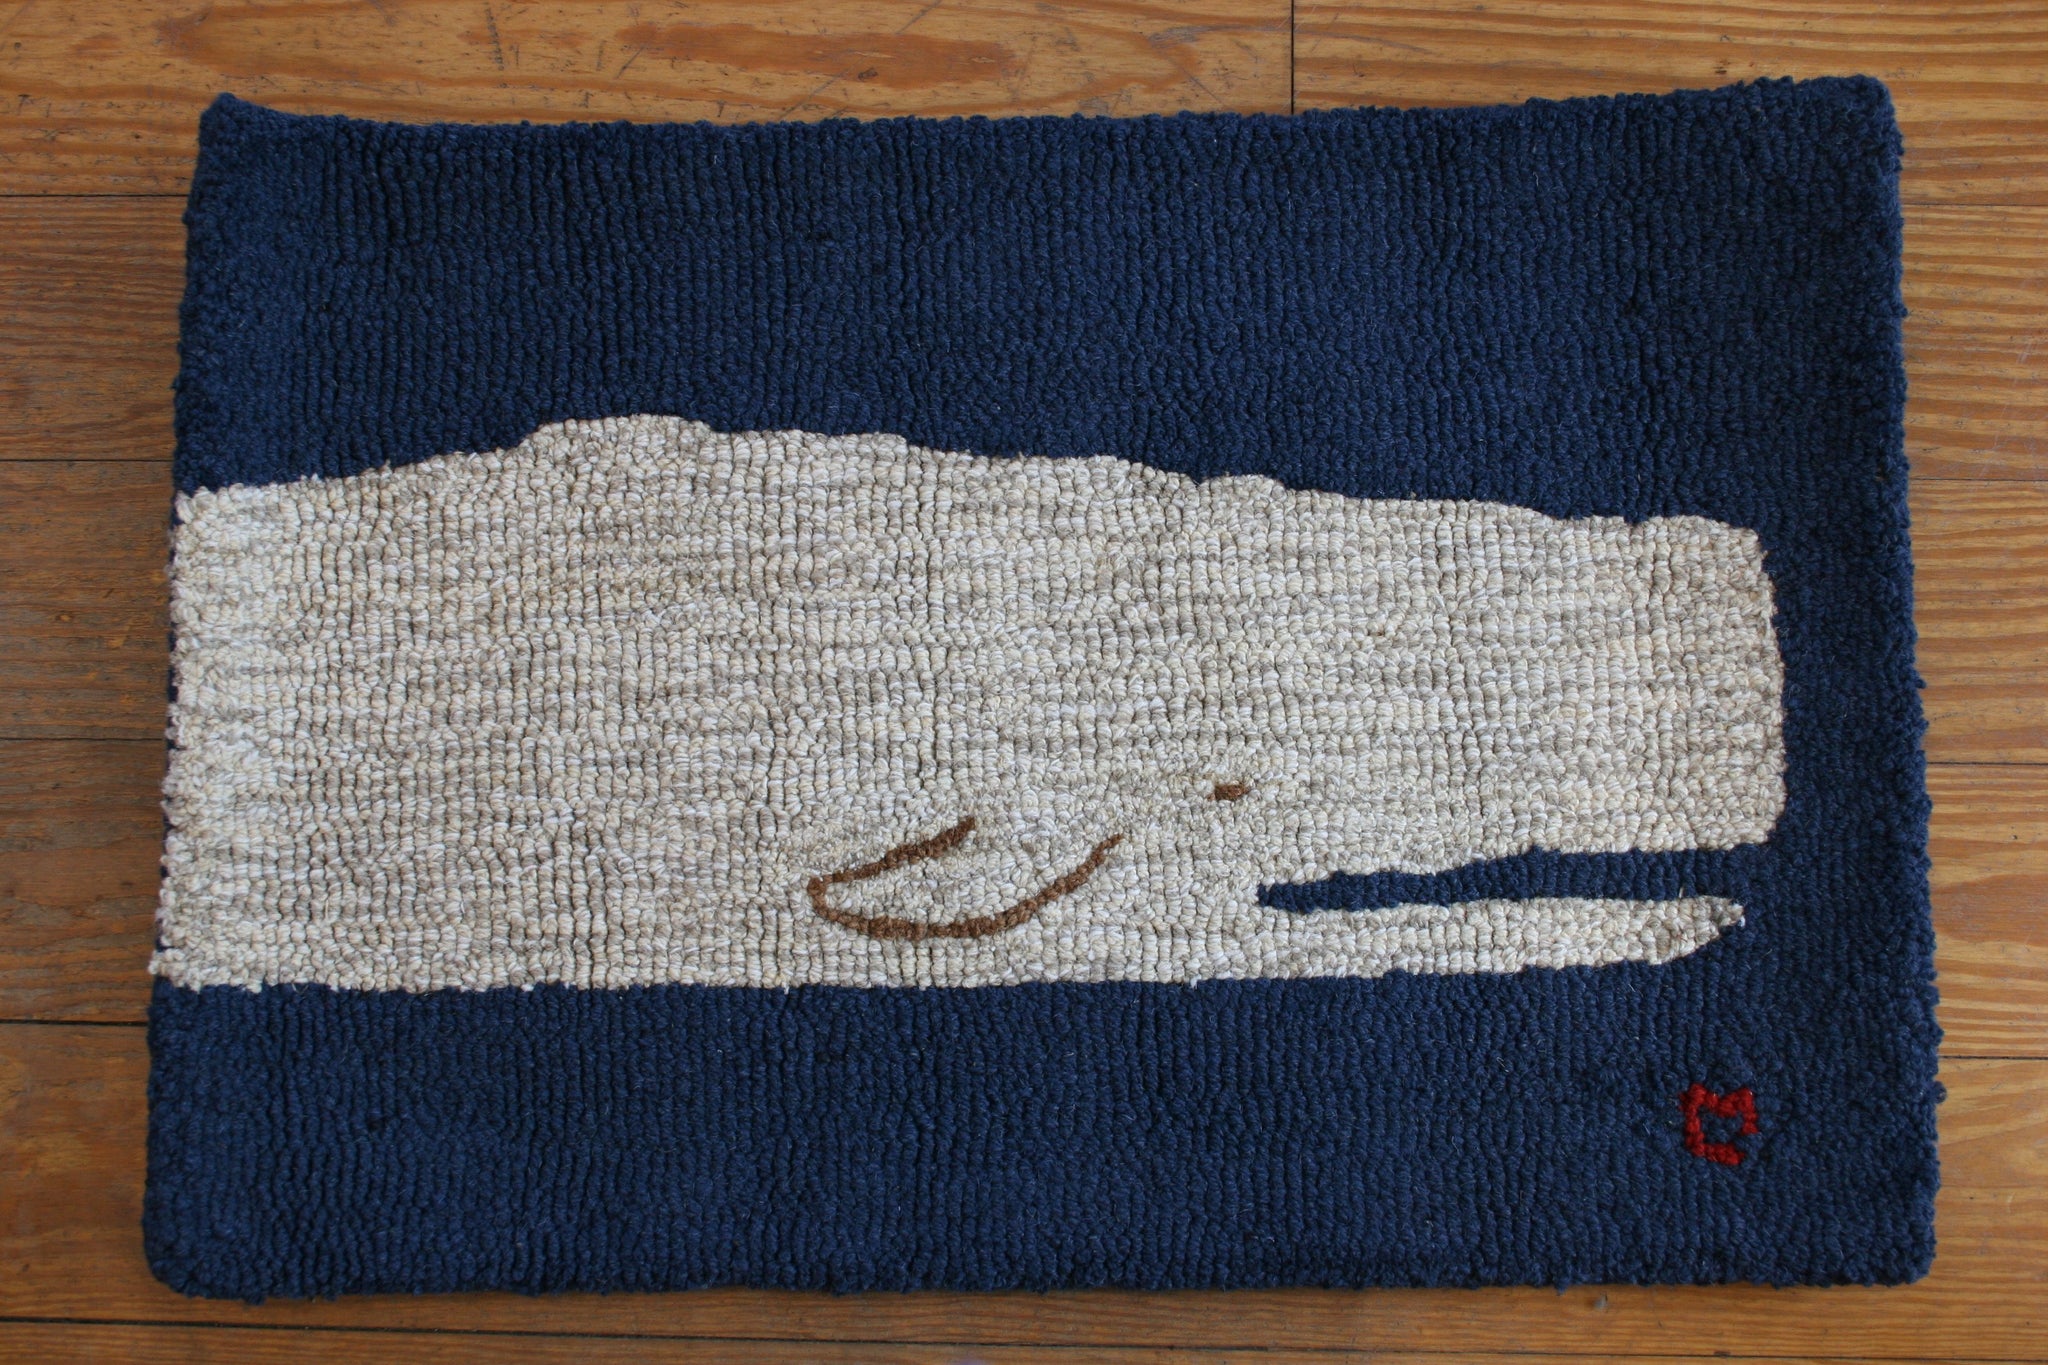 20x30 White Whale on Blue Wool Hooked Rug